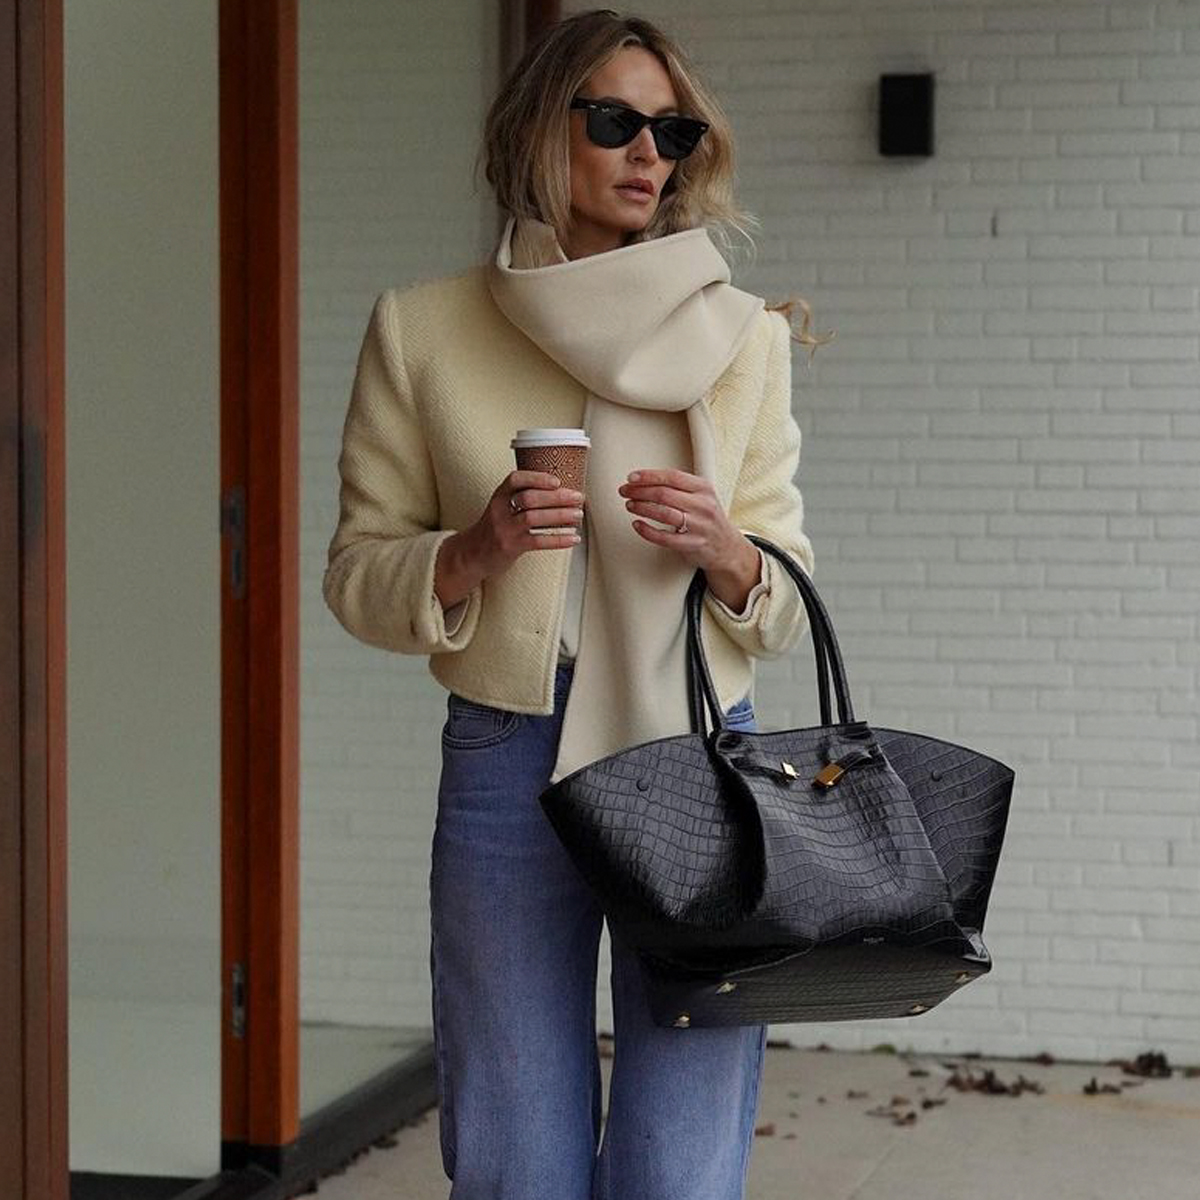 The 18 Best Minimalist Handbags to Elevate Your Outfits